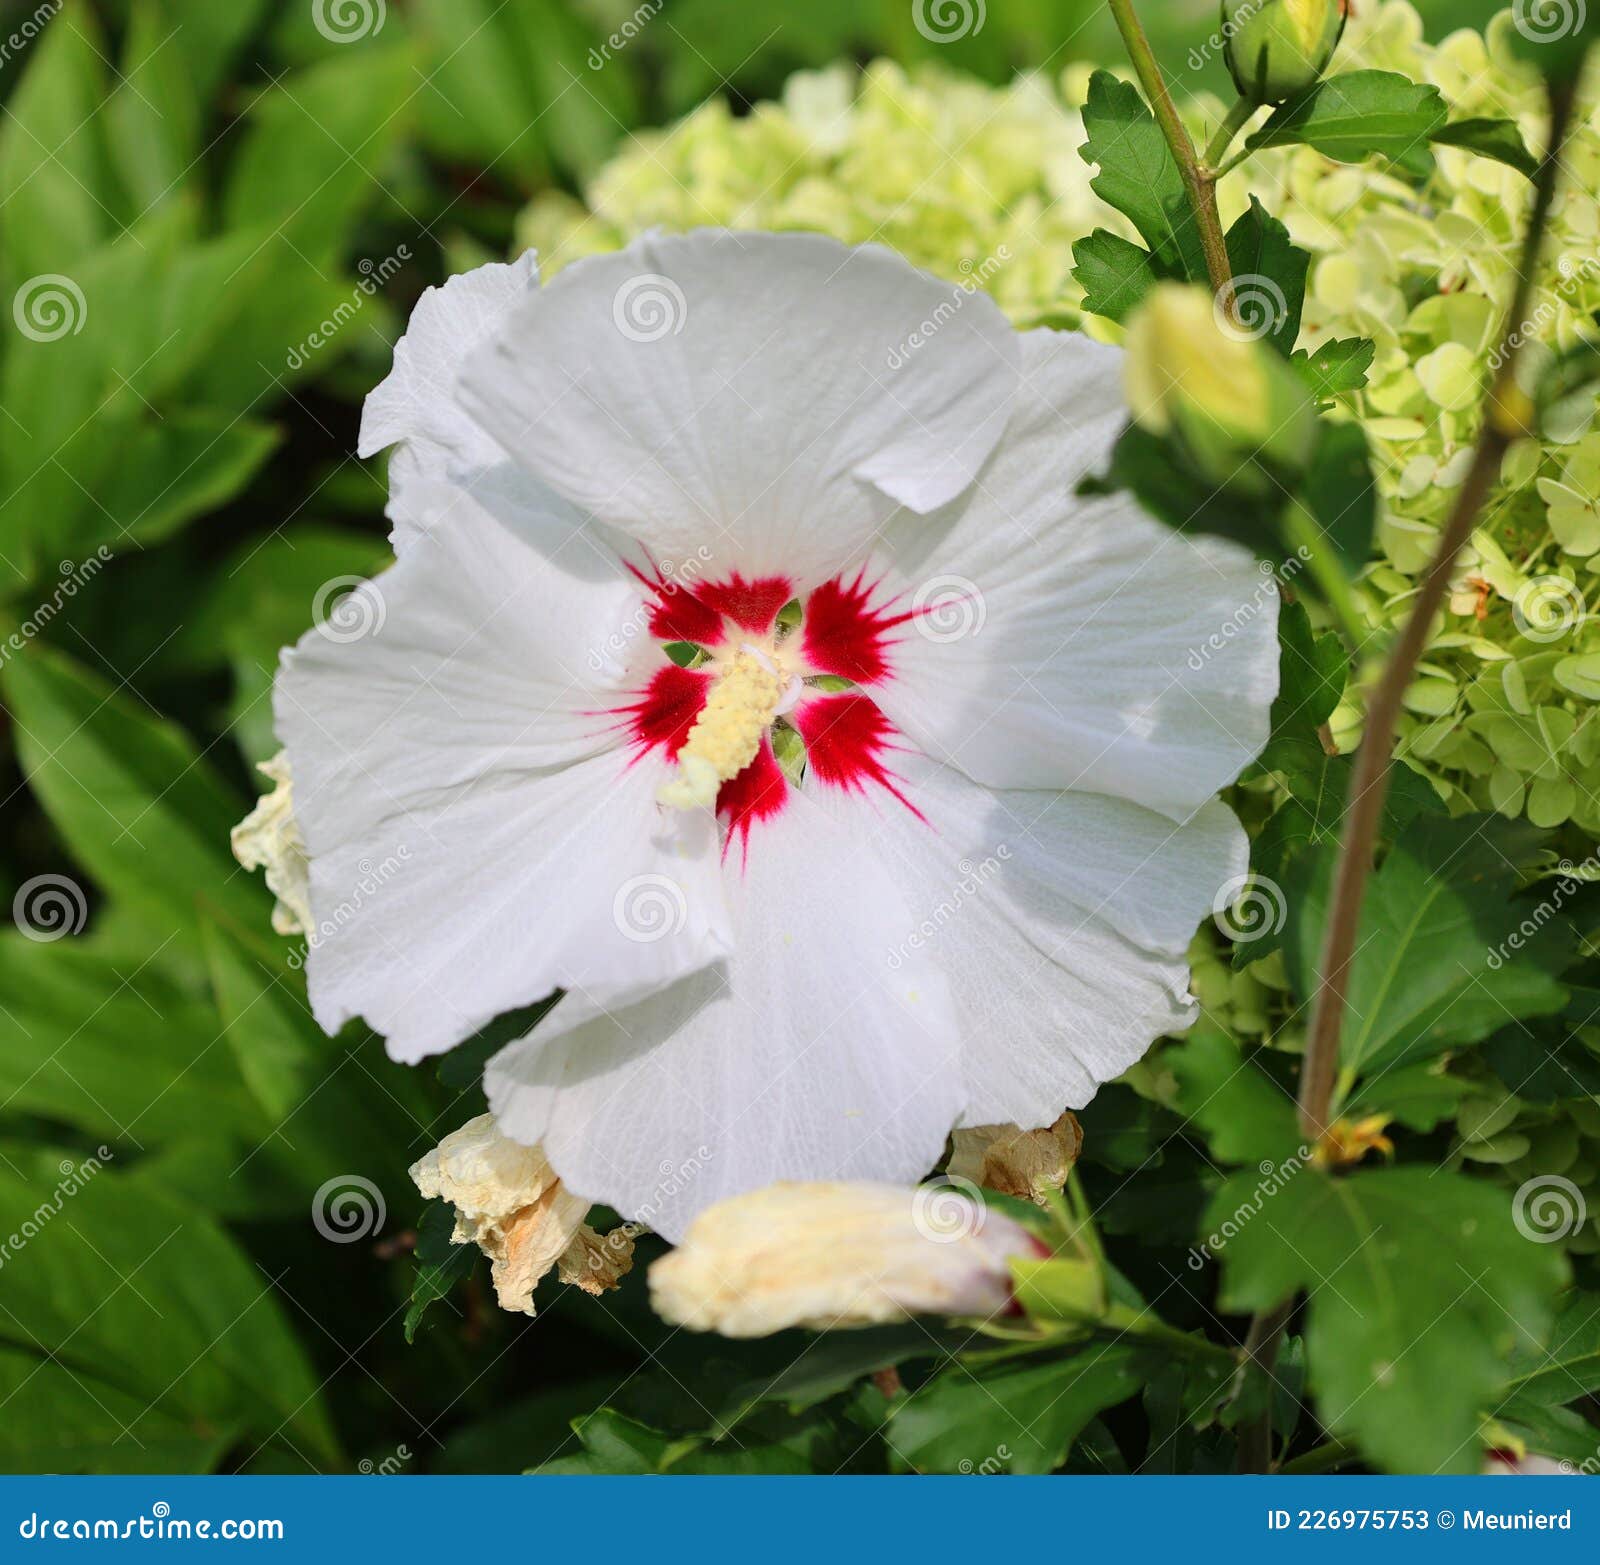 hibiscus is a genus of flowering plants in the mallow family, malvaceae.